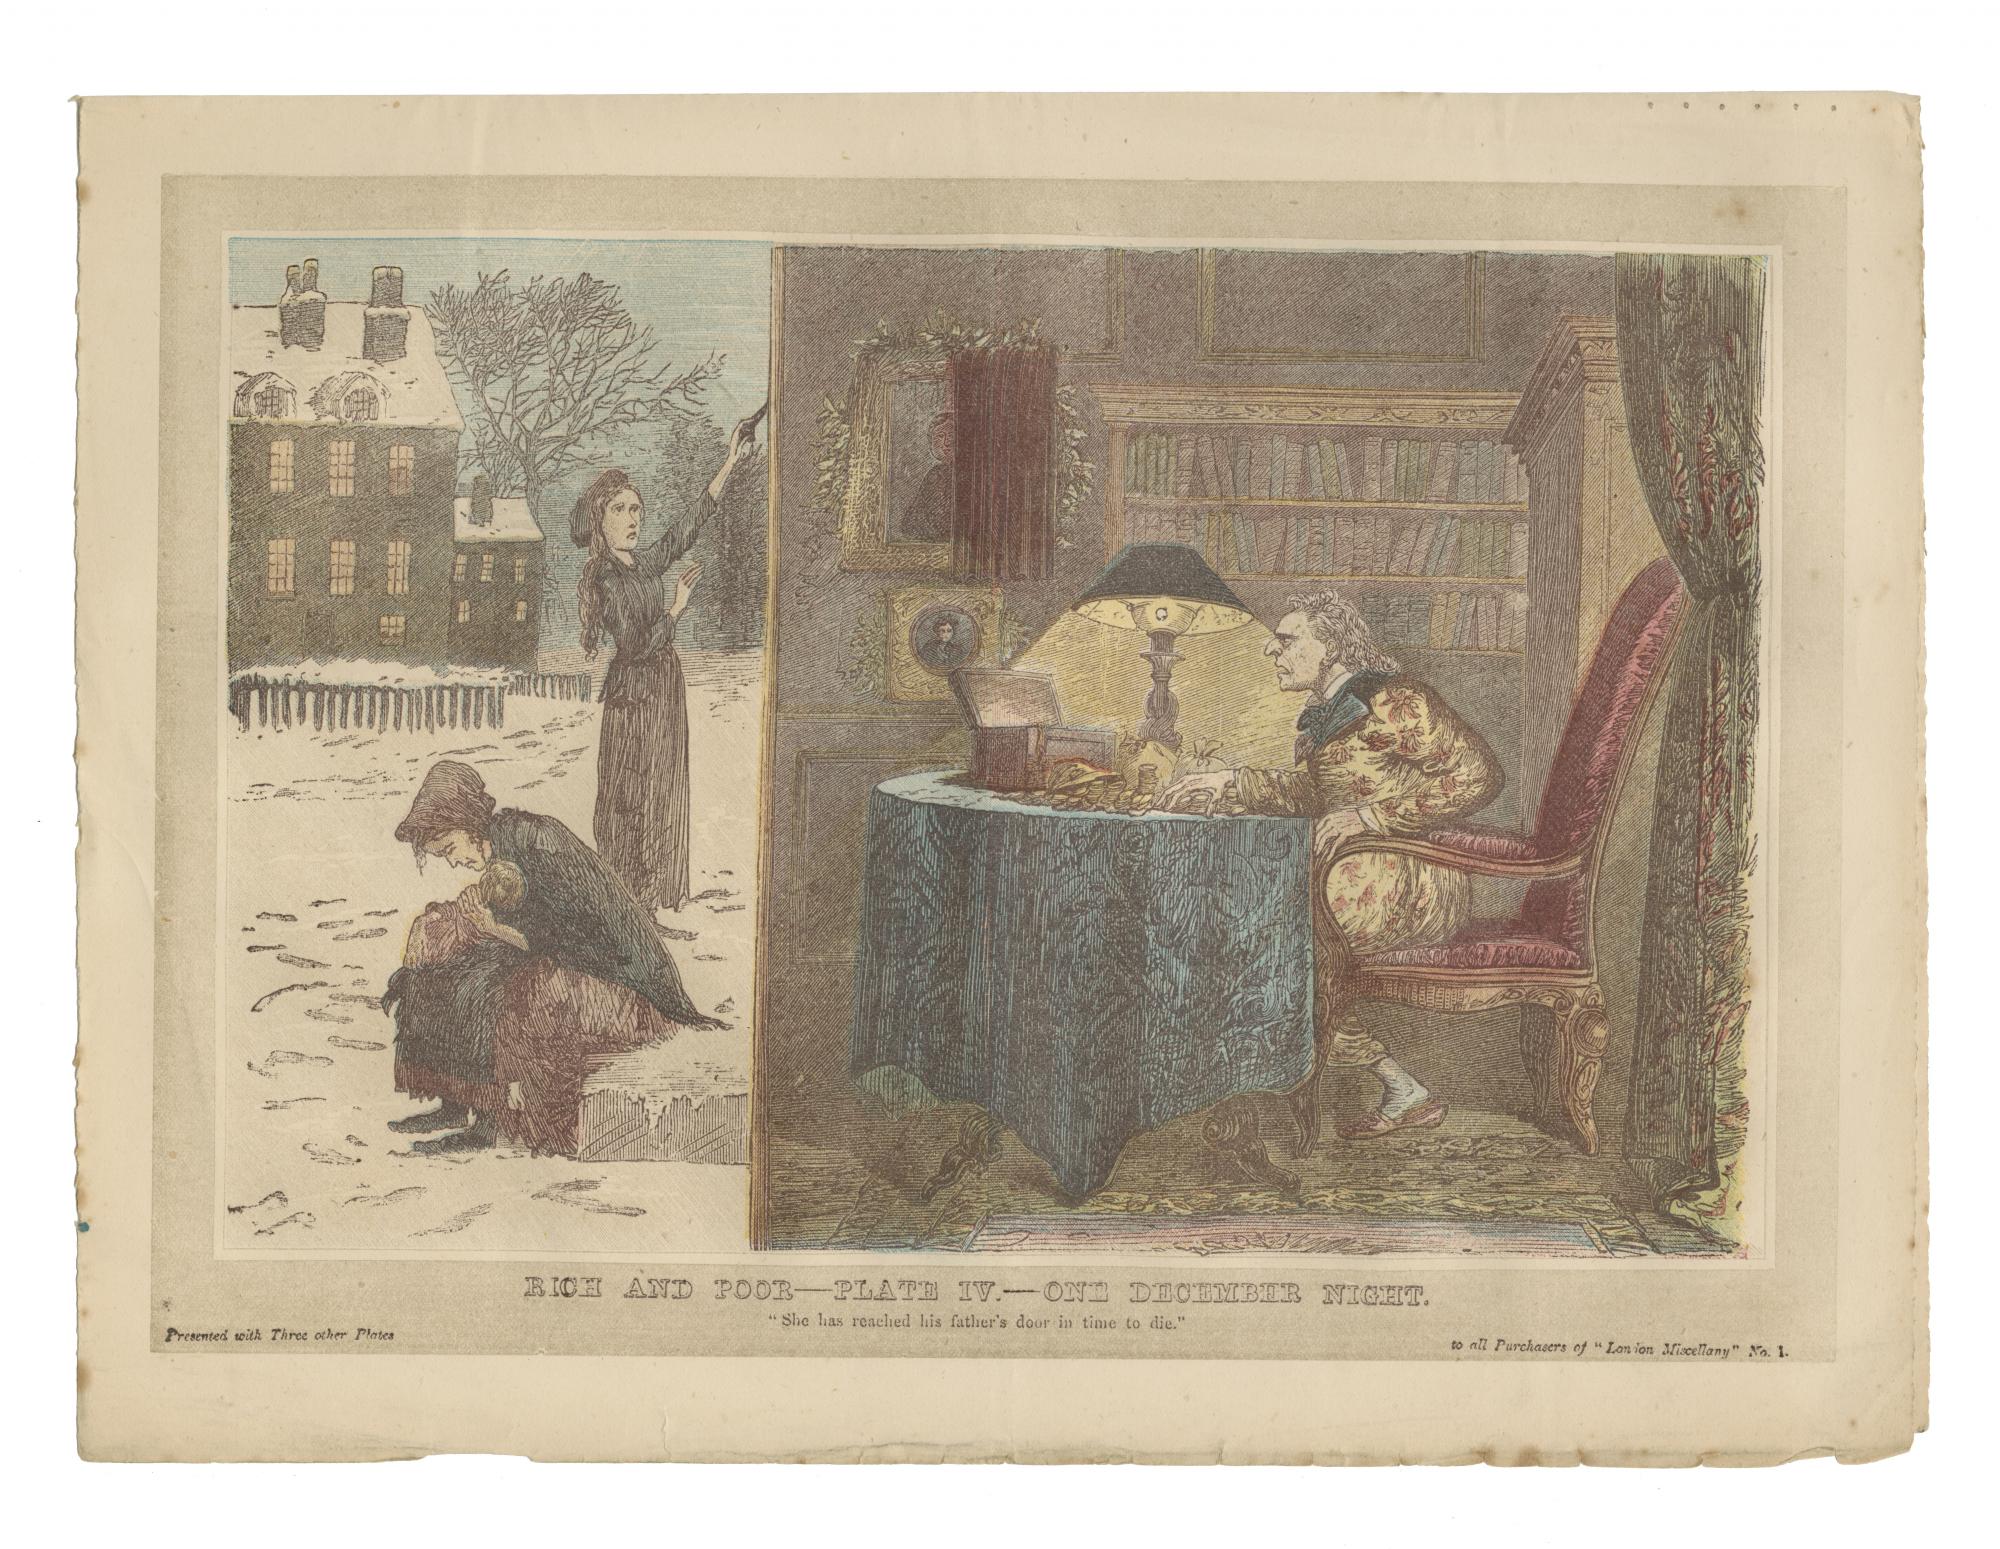 "Rich and Poor--Plate IV.---One December Night."